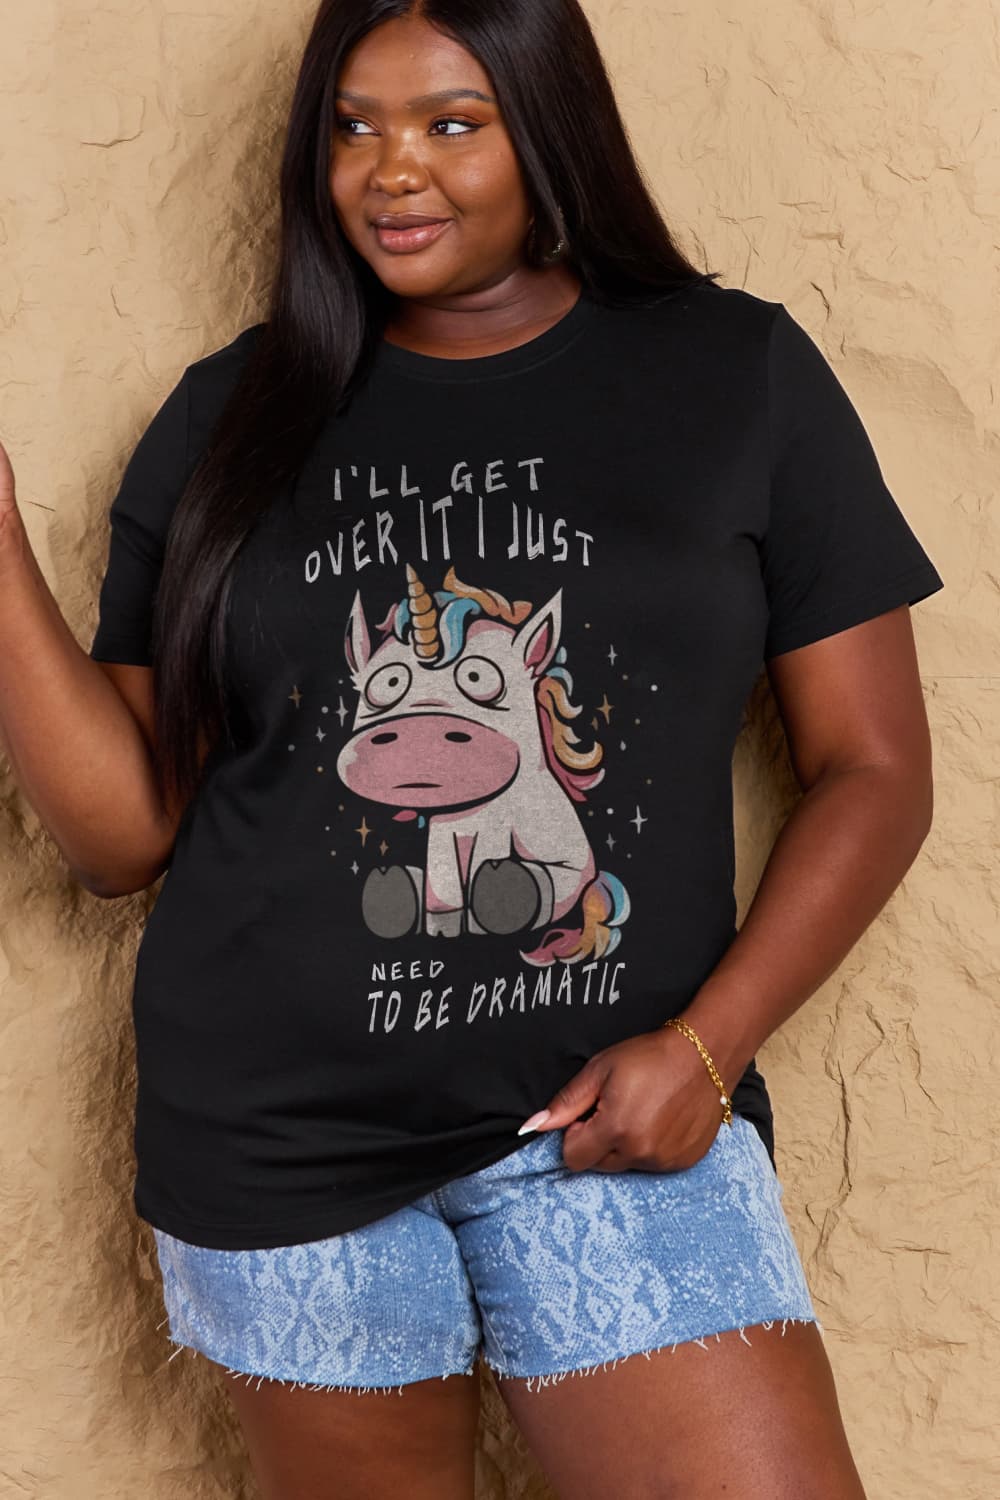 Full Size I’LL GET OVER IT I JUST NEED TO BE DRAMATIC Graphic Cotton Tee - Black / S - T-Shirts - Shirts & Tops - 4